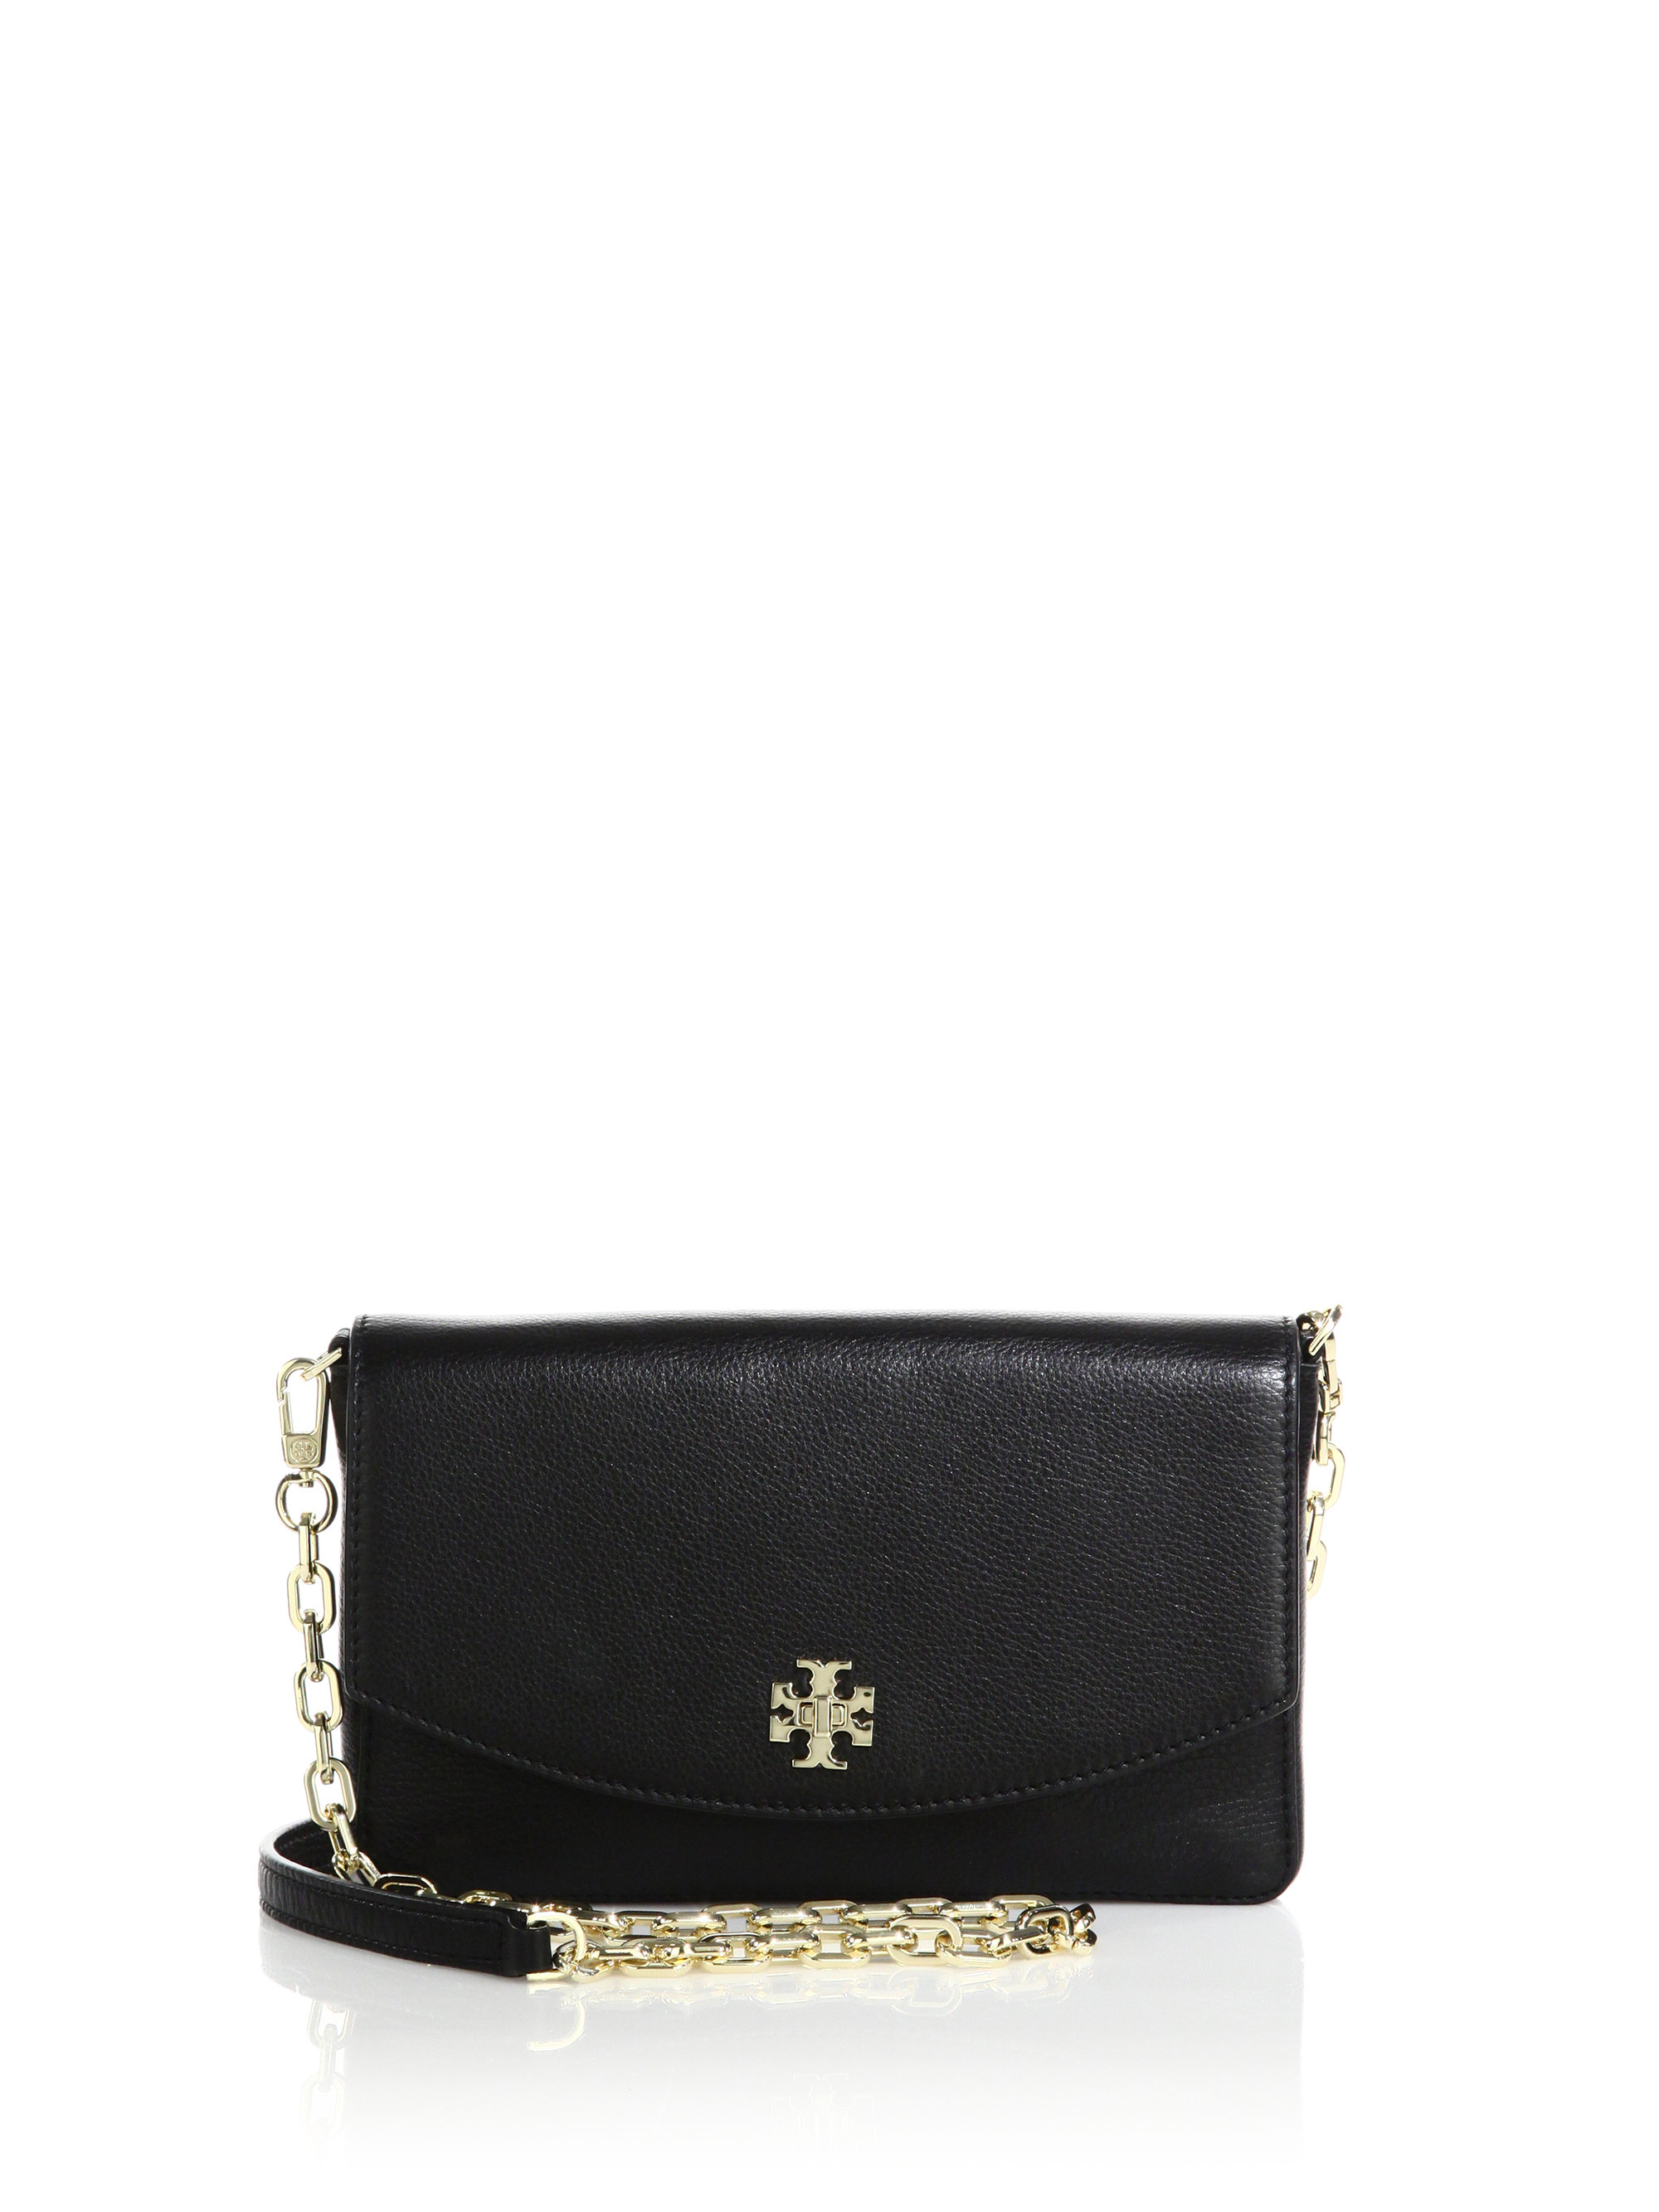 Tory burch Mercer Classic Leather Chain Shoulder Bag in Black | Lyst